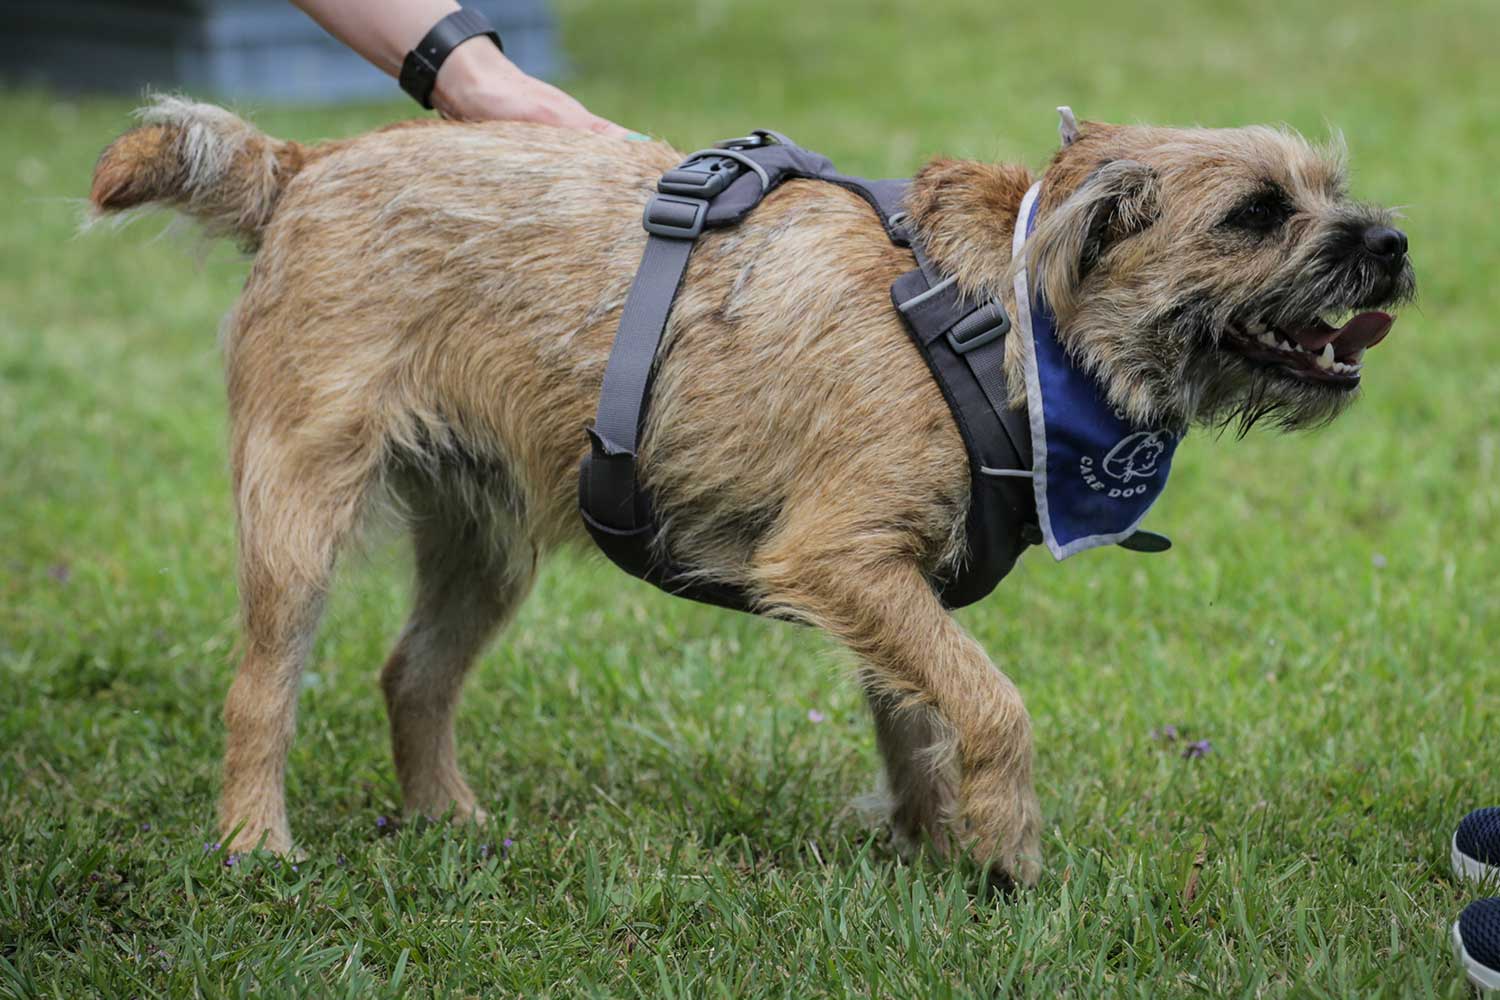 A border terrier wearing a harness